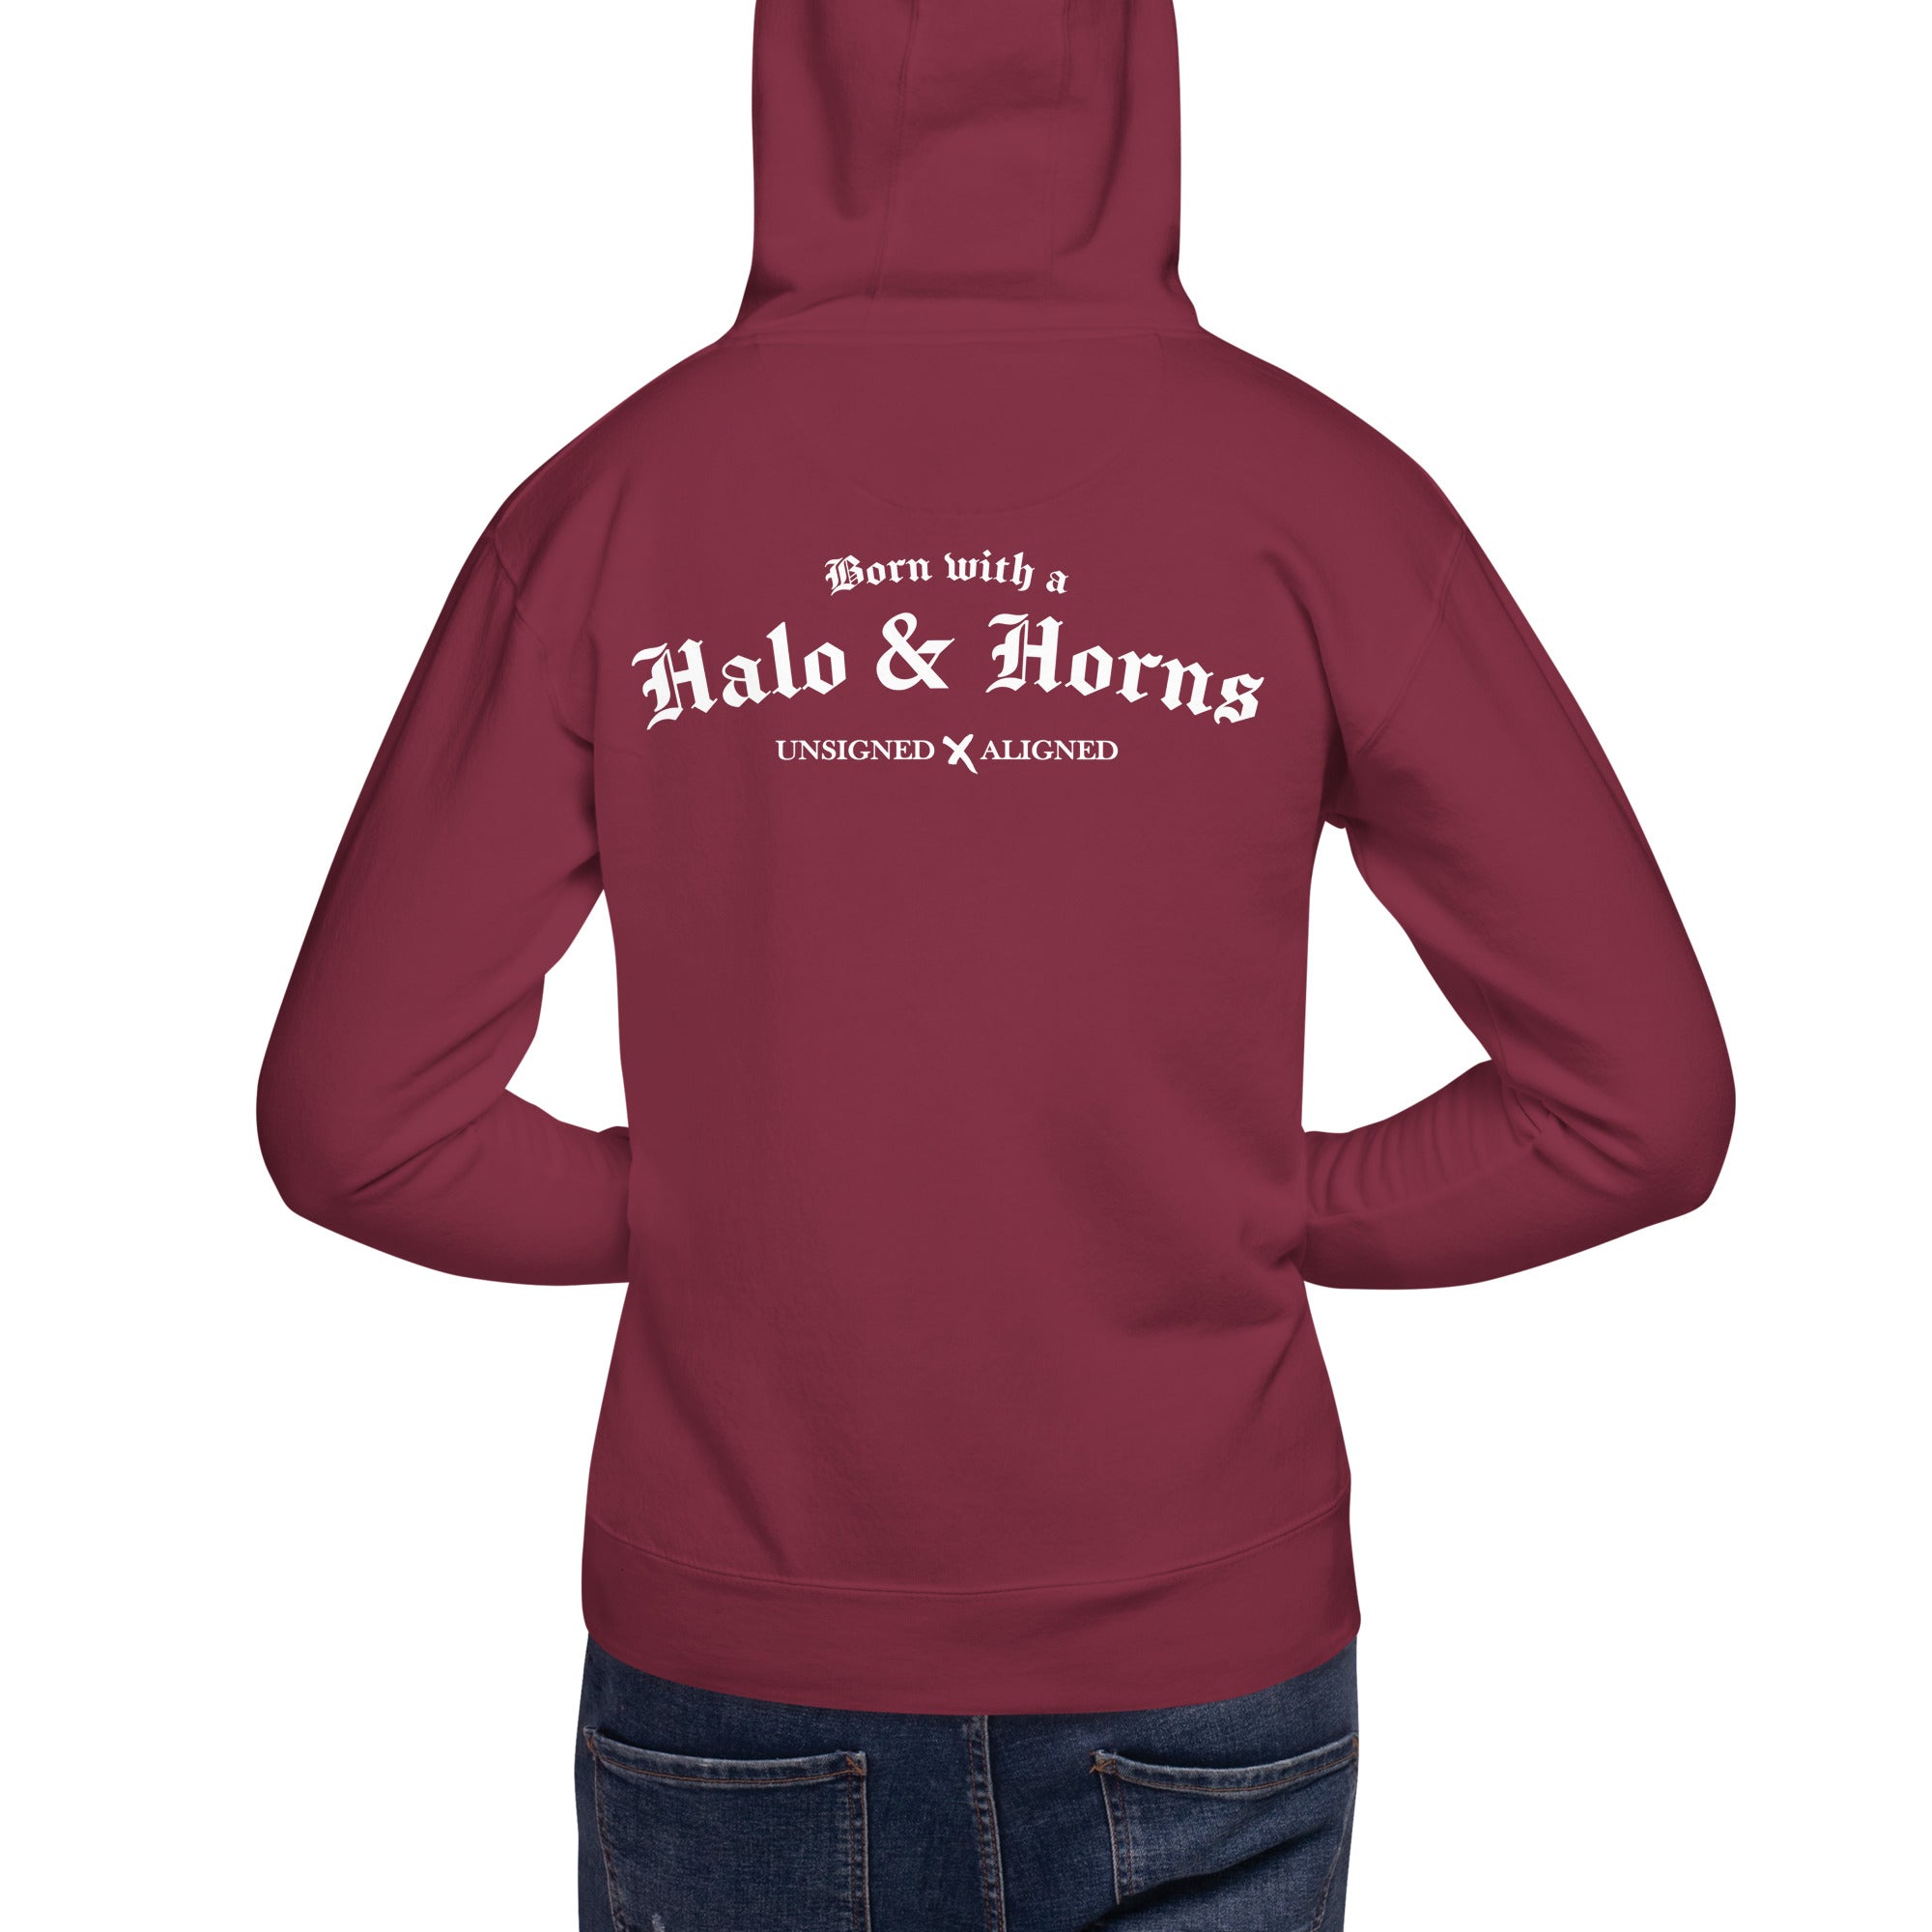 Halo & Horns- Unisex Hoodie (+ more colors)